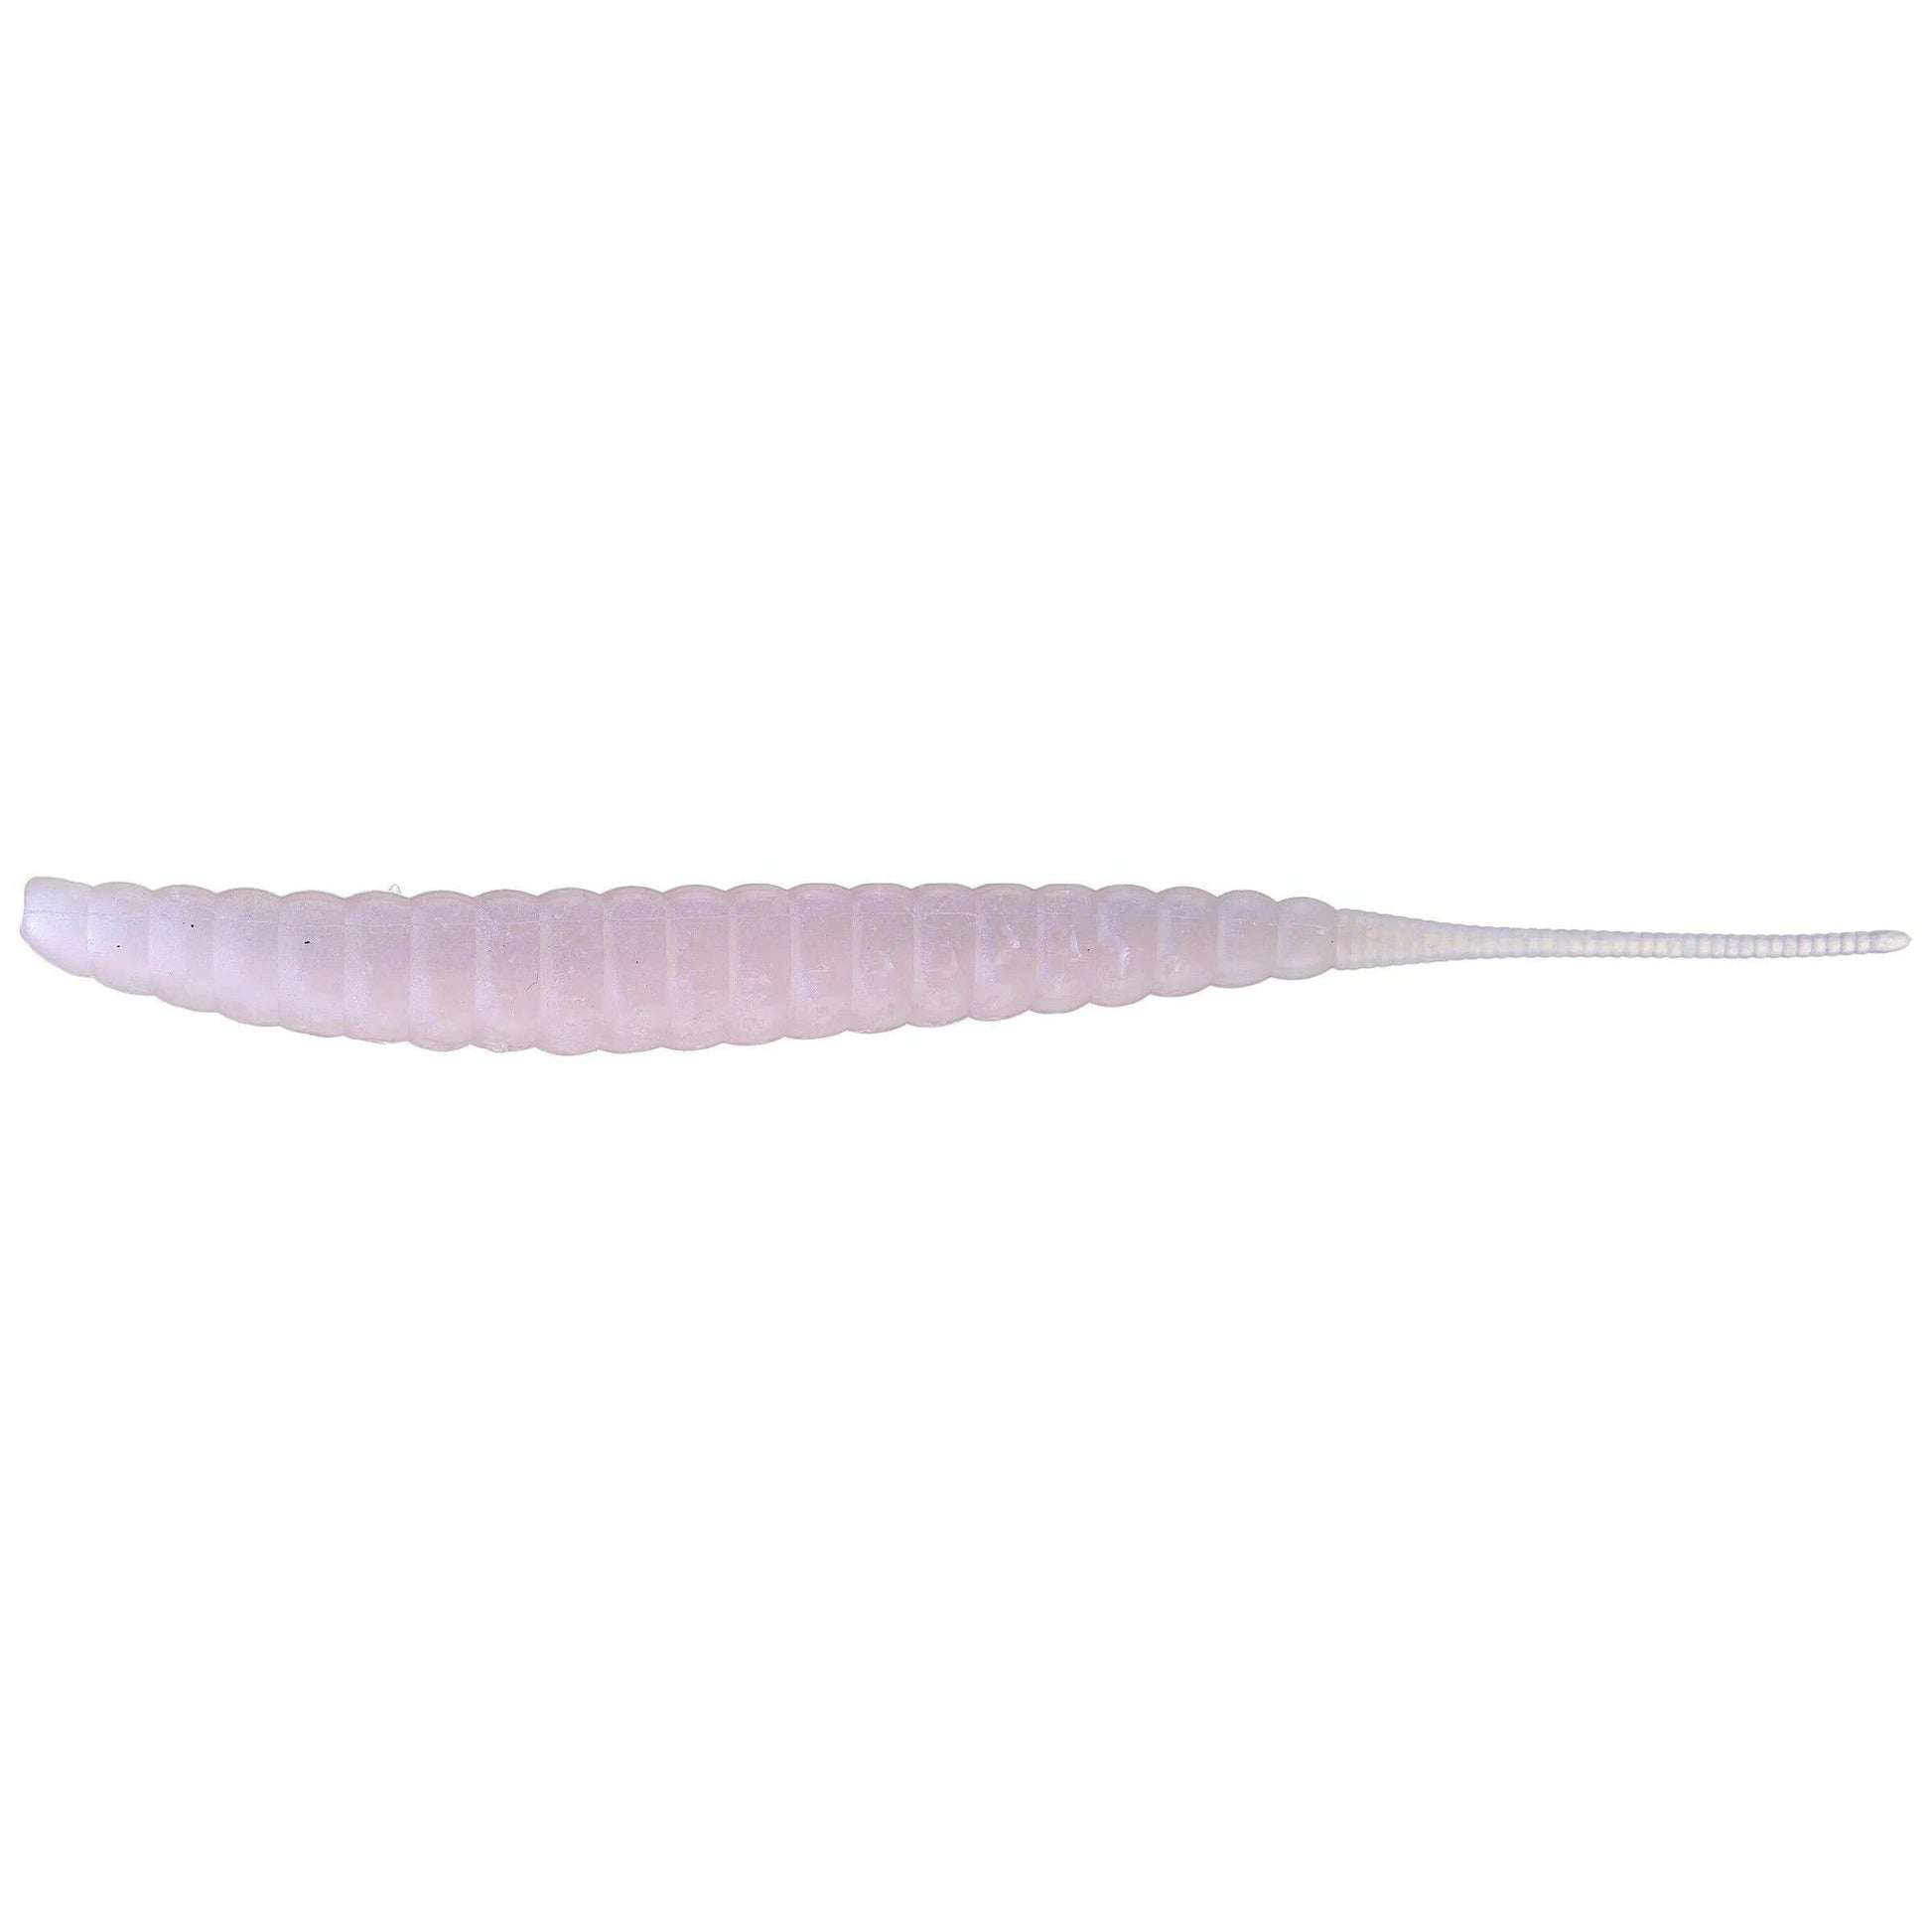 Geecrack Revival Shad Worm Natural Pro Blue